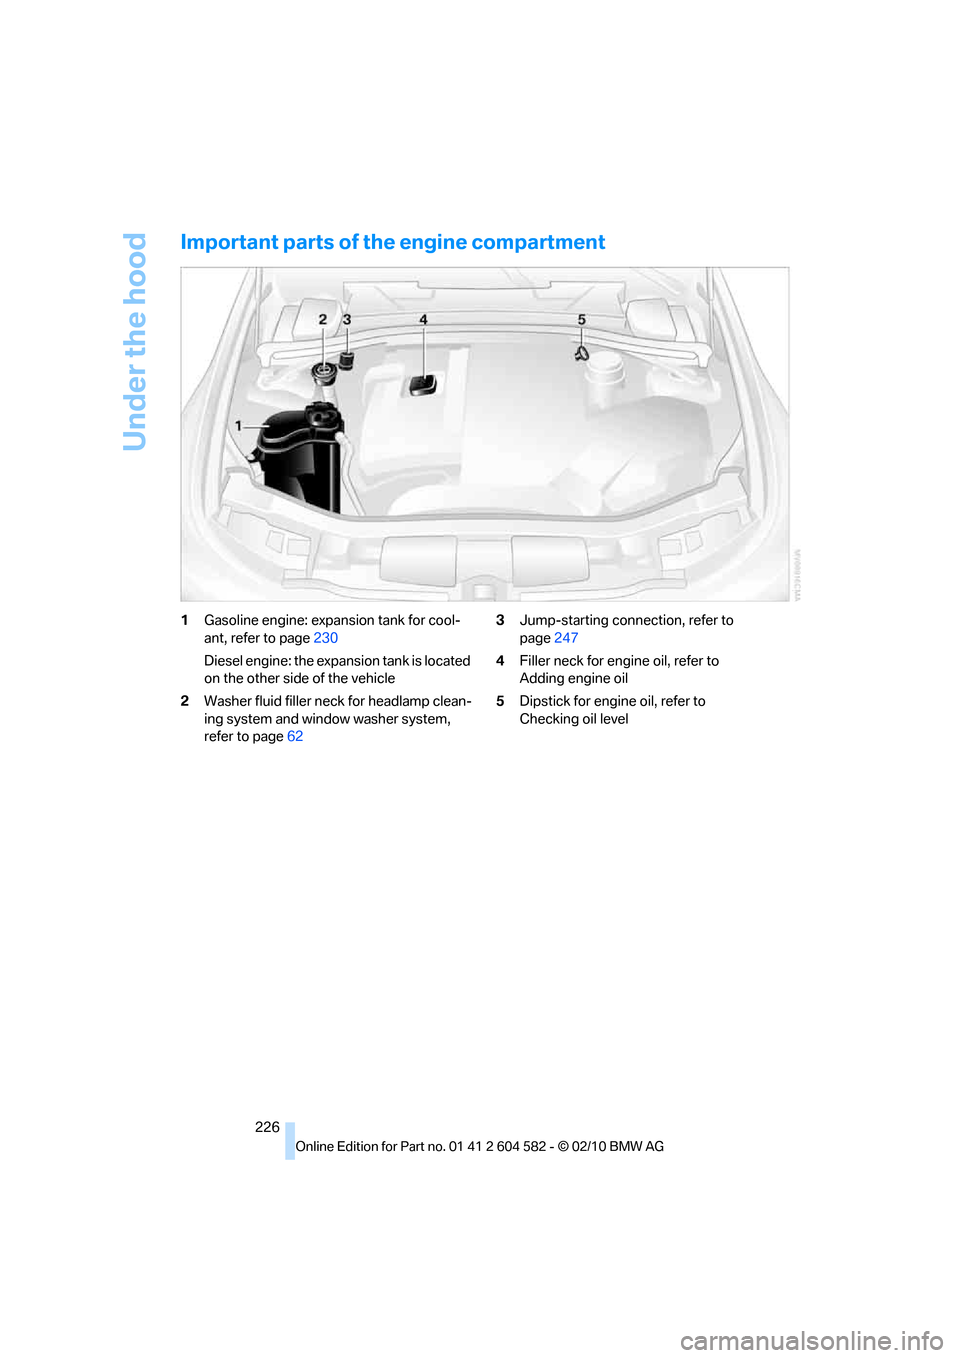 BMW 323I TOURING 2011 E91 Owners Manual Under the hood
226
Important parts of the engine compartment
1Gasoline engine: expansion tank for cool-
ant, refer to page230
Diesel engine: the expansion tank is located 
on the other side of the veh